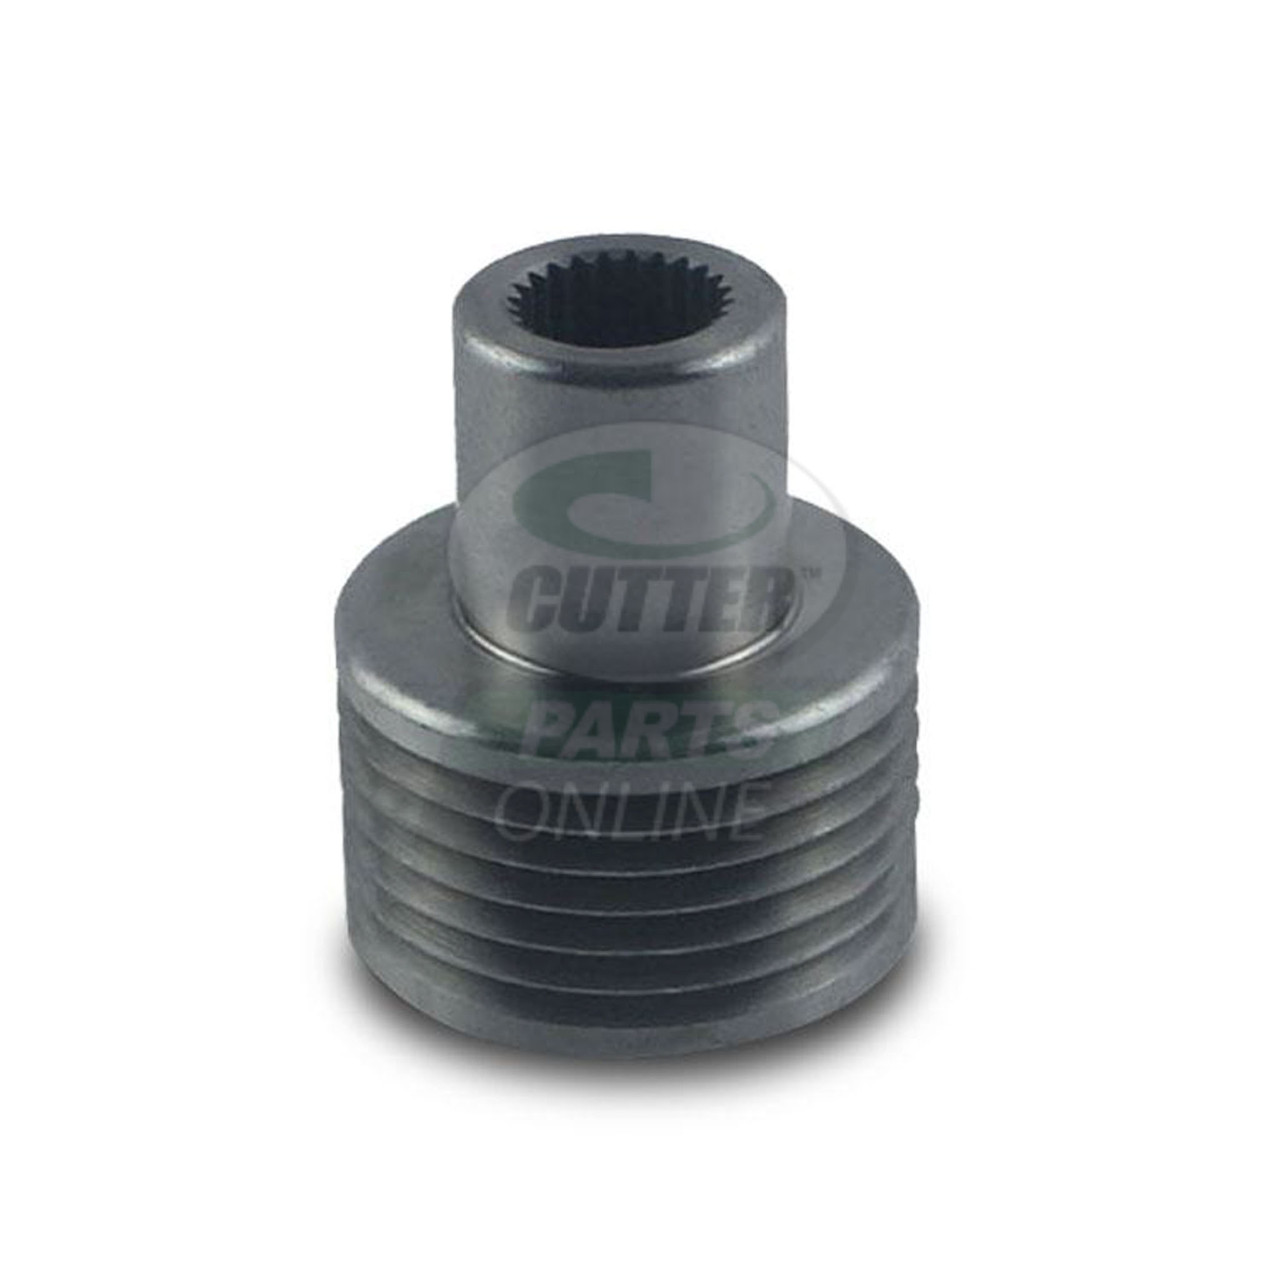 New Pulley - Groomer, Splined - Replaces Toro 110-2471